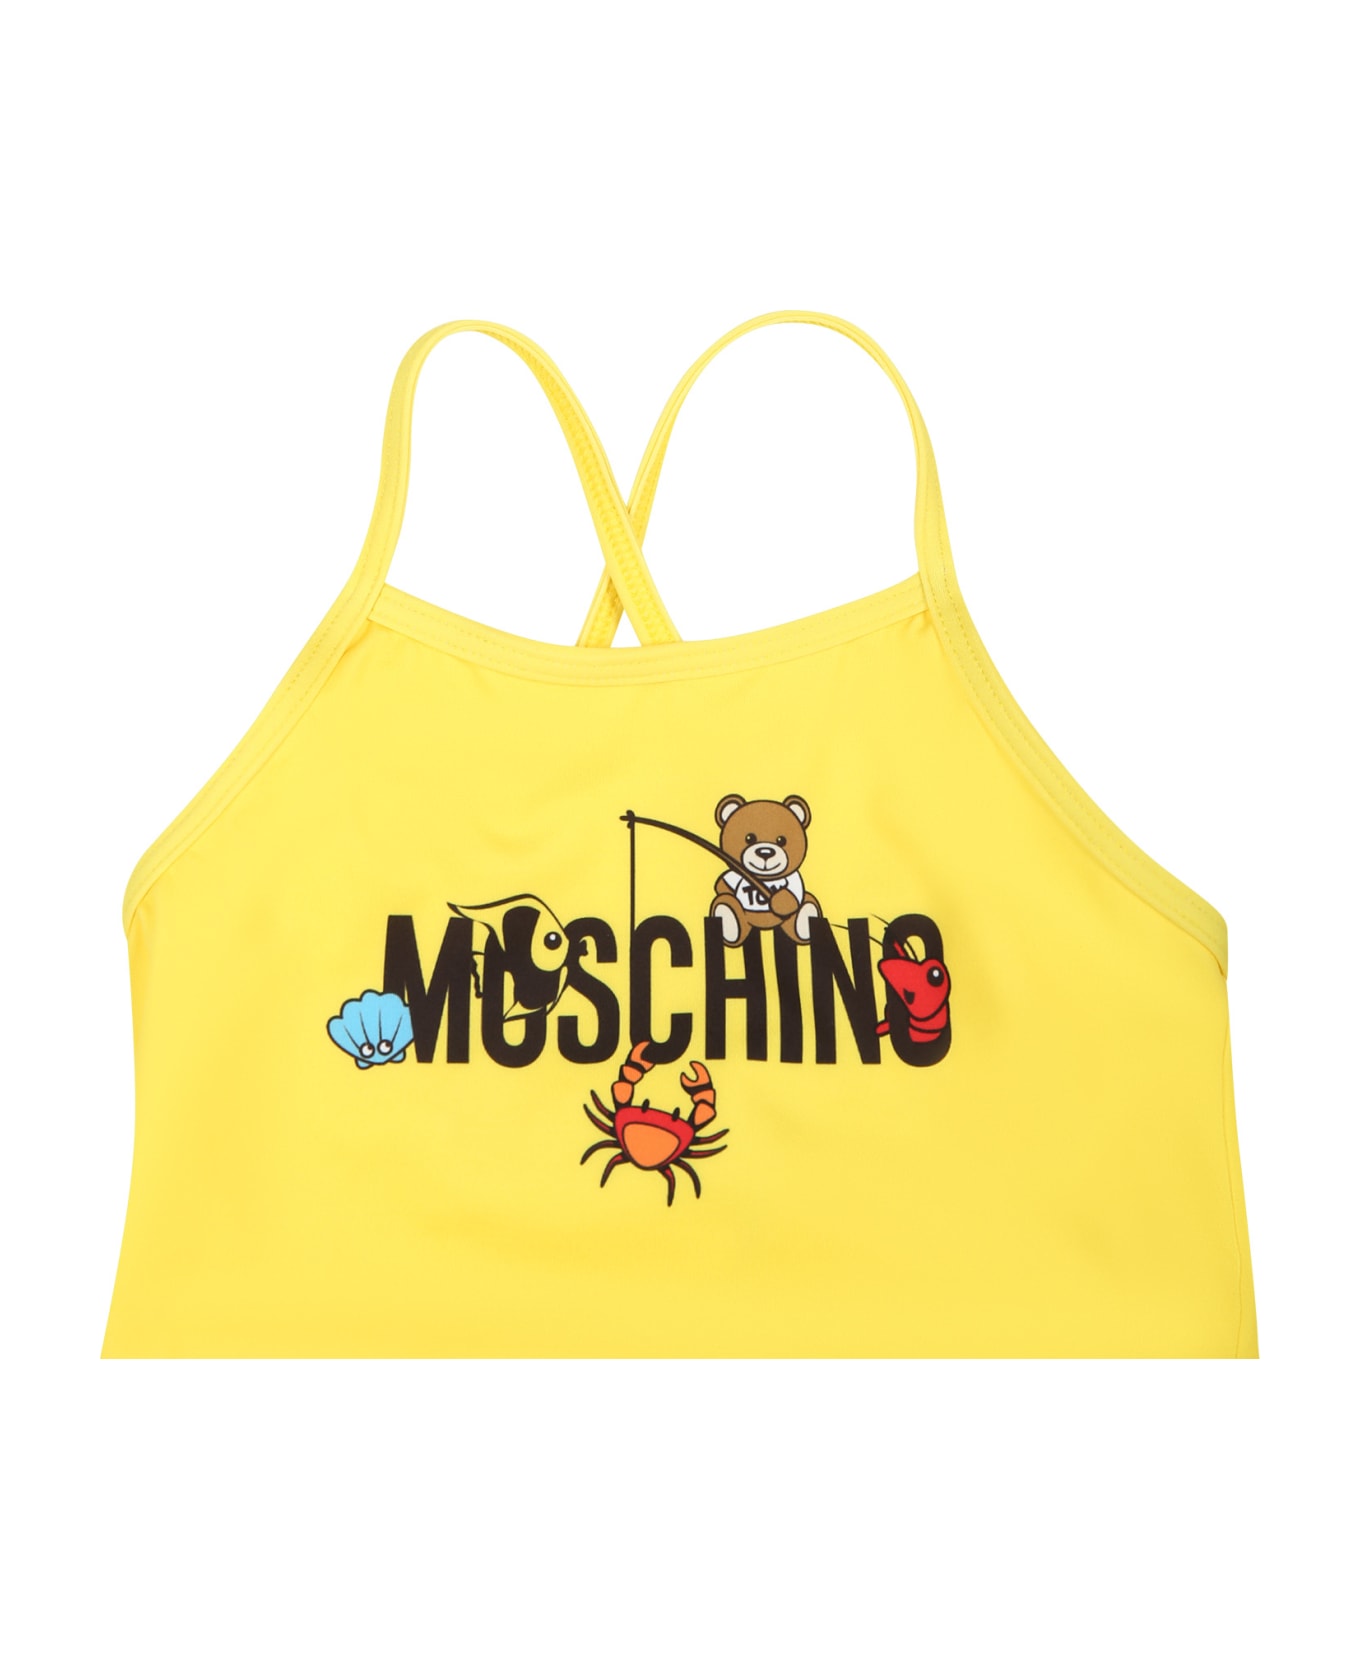 Moschino Yellow Swimsuit For Baby Girl With Teddy Bear And Marine Animals - Yellow 水着